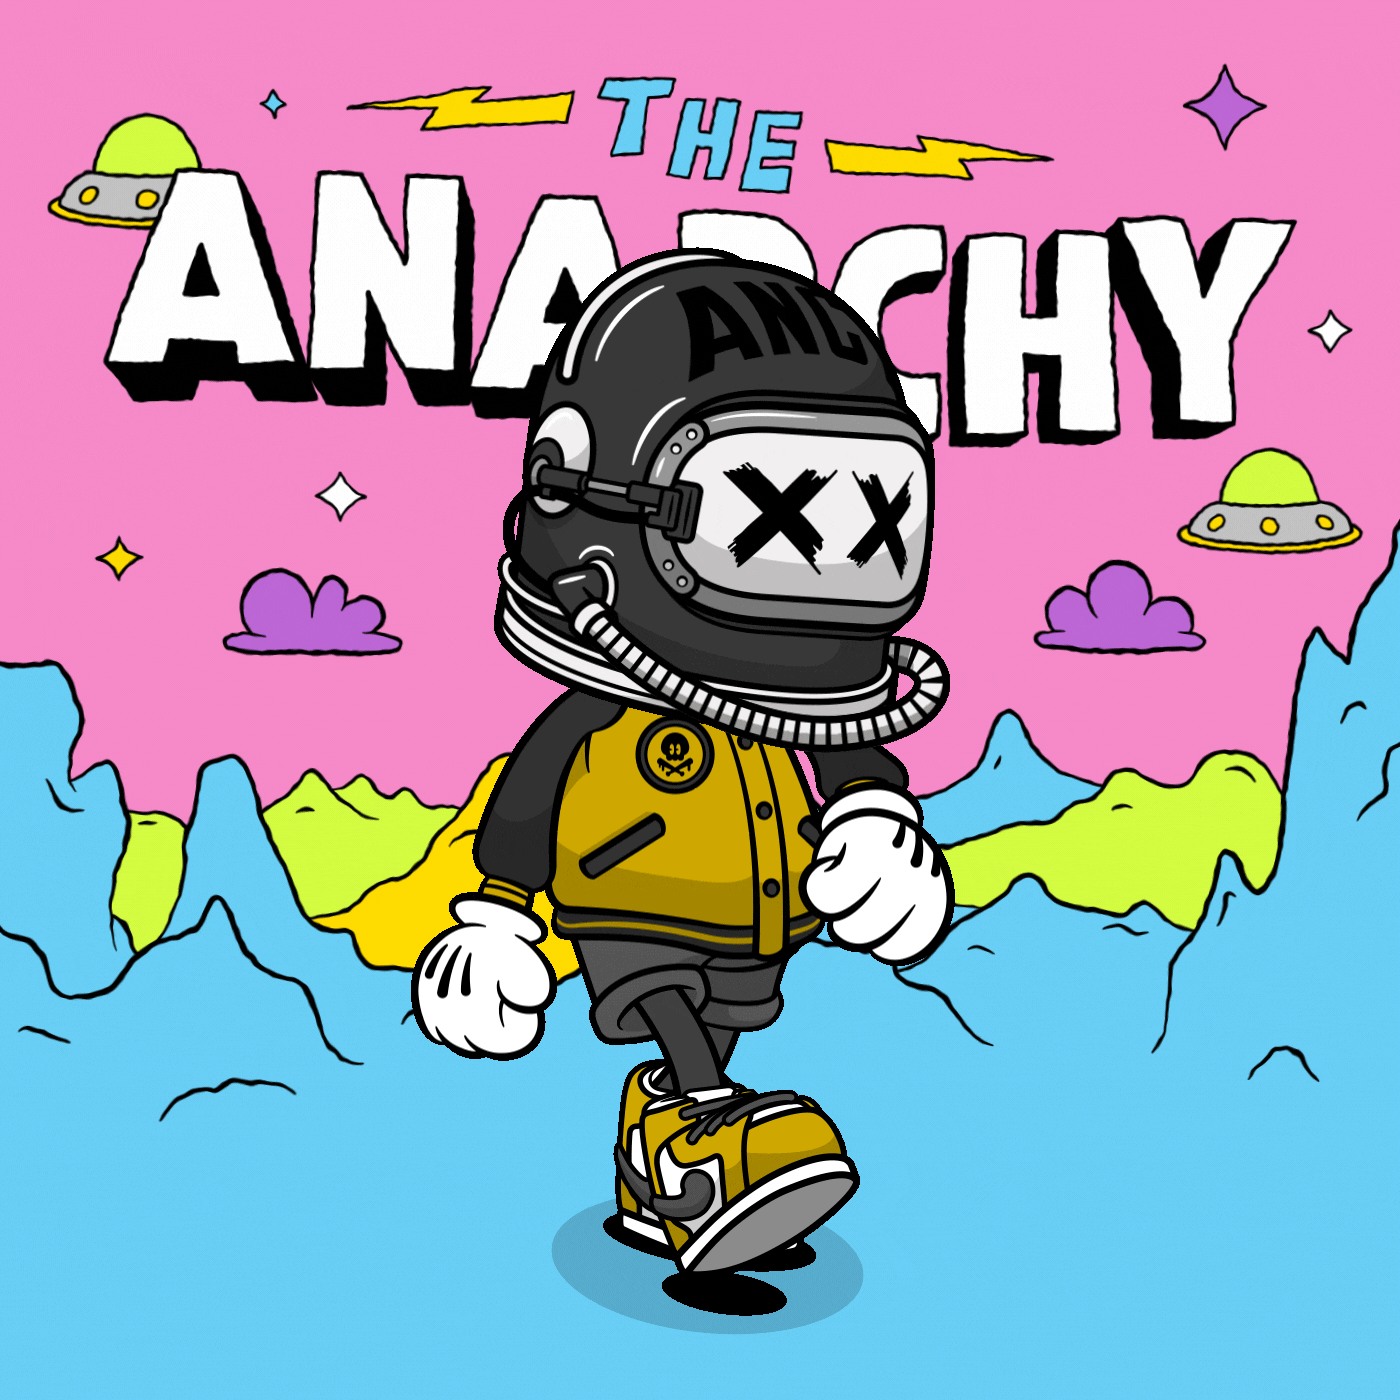 The ANARCHY #0193